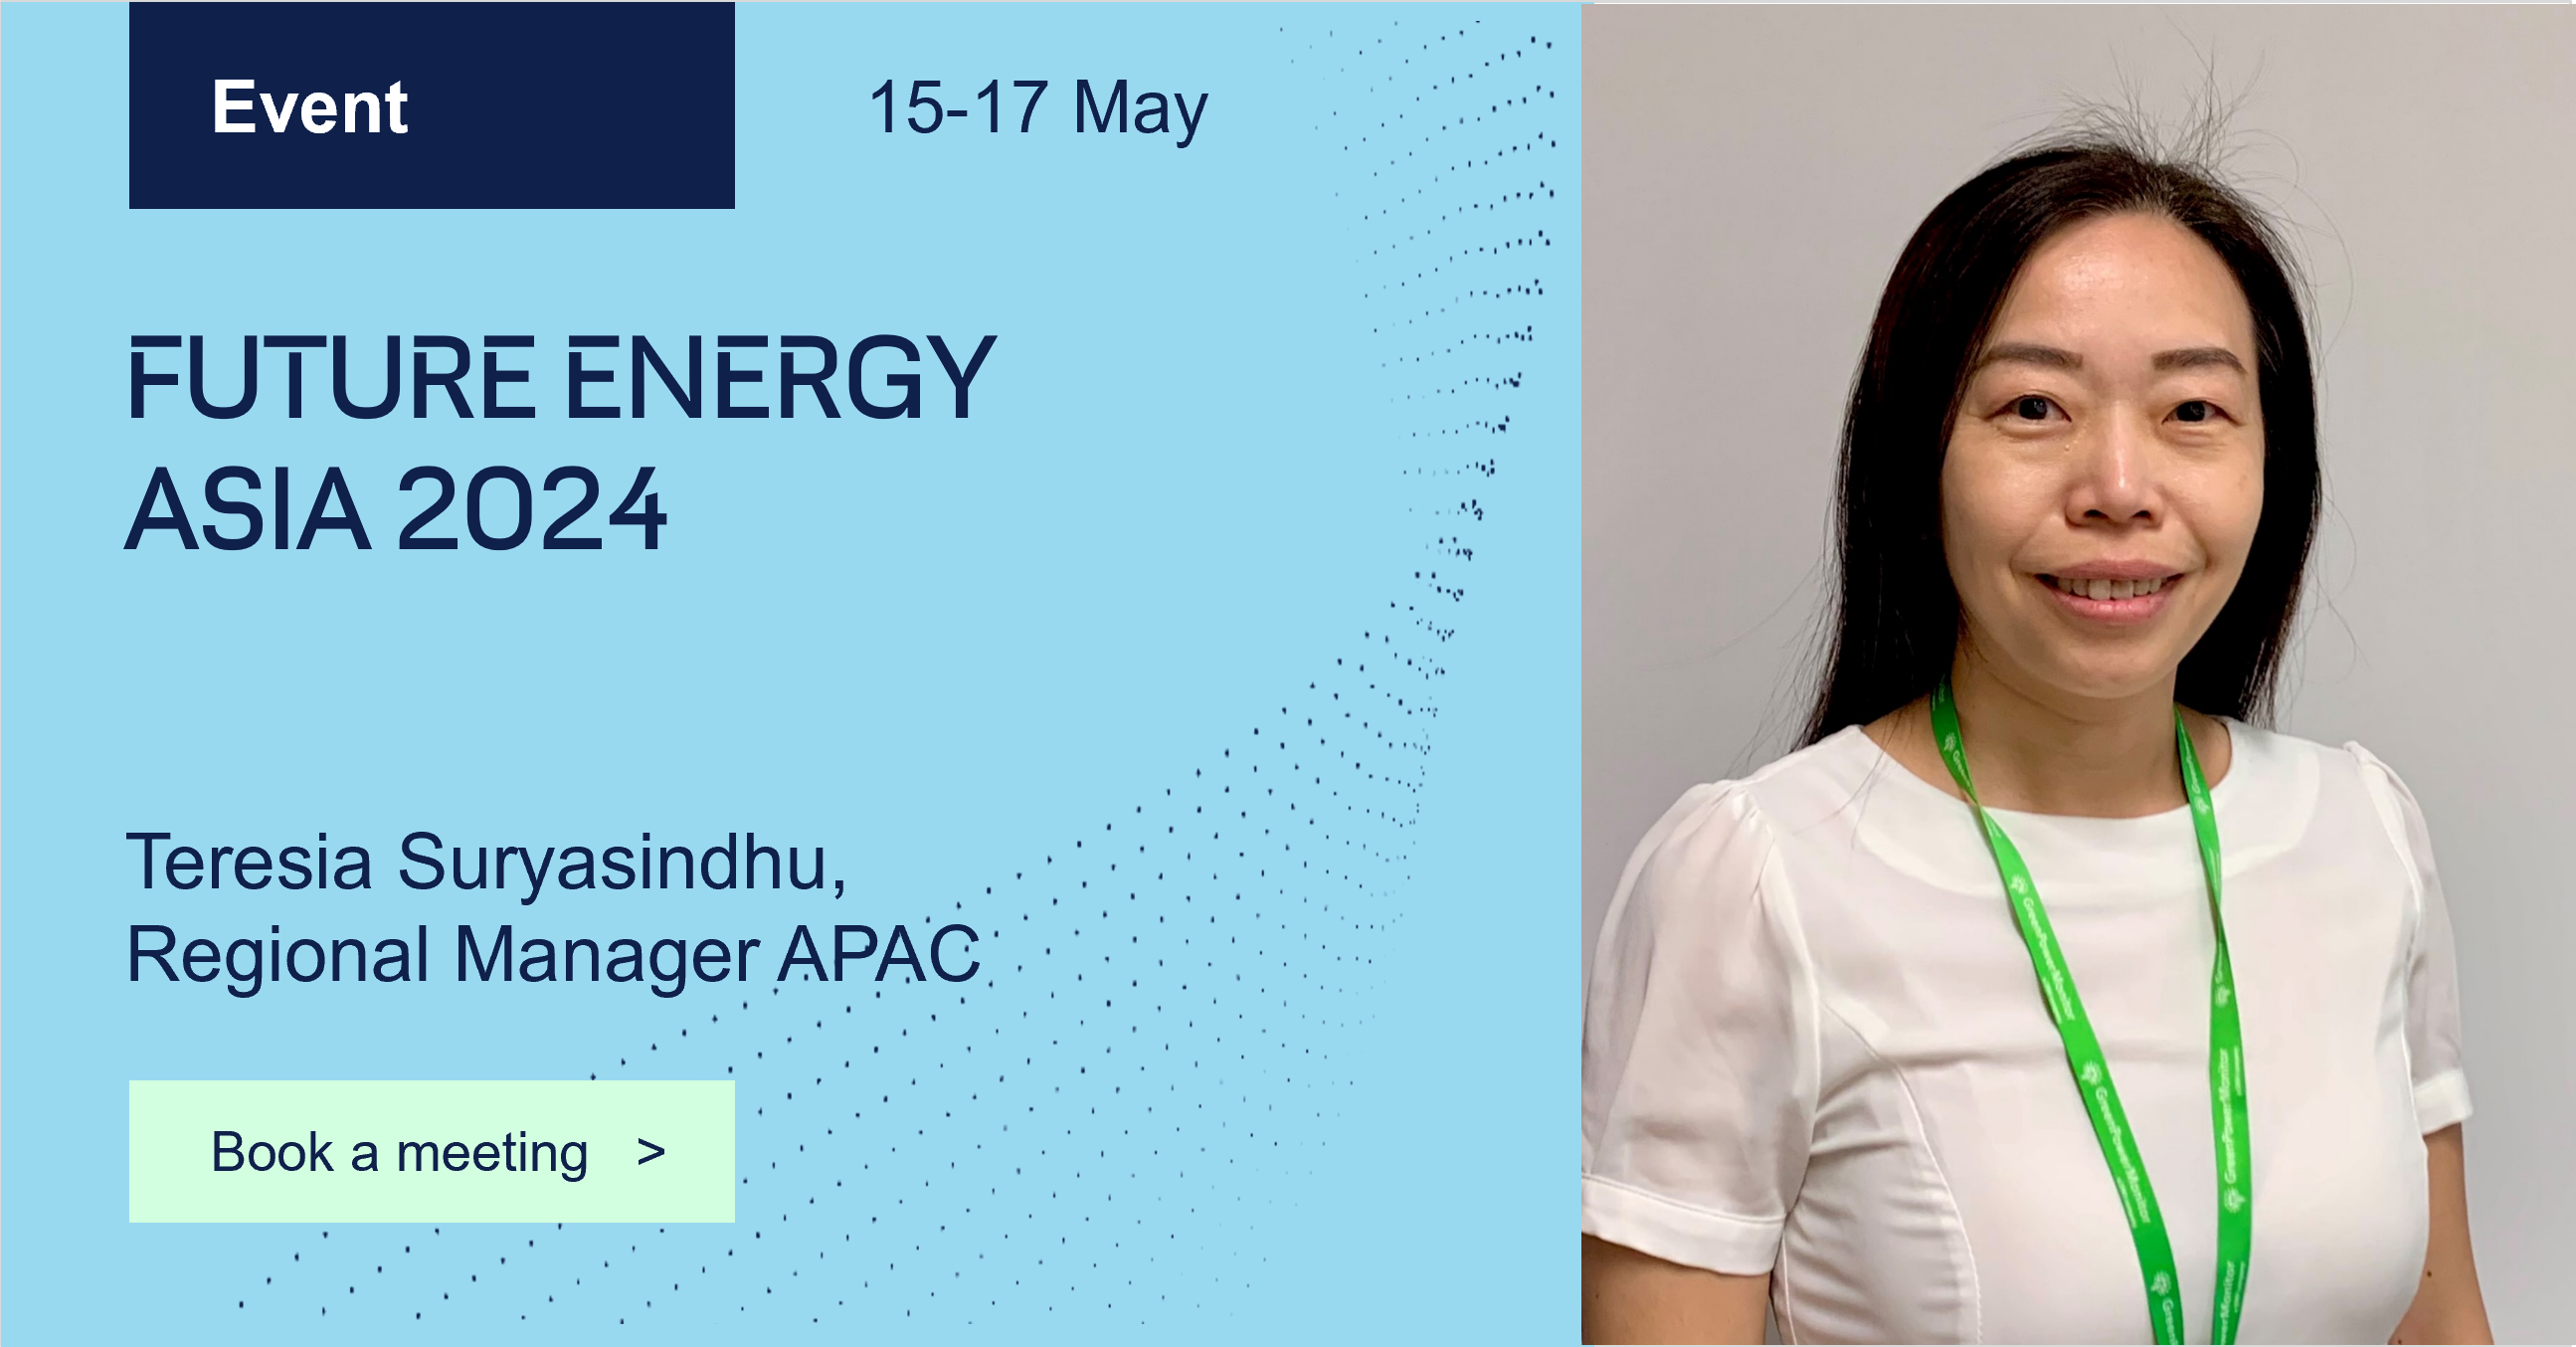 GreenPowerMonitor will attend the Future Energy Asia Event 2024